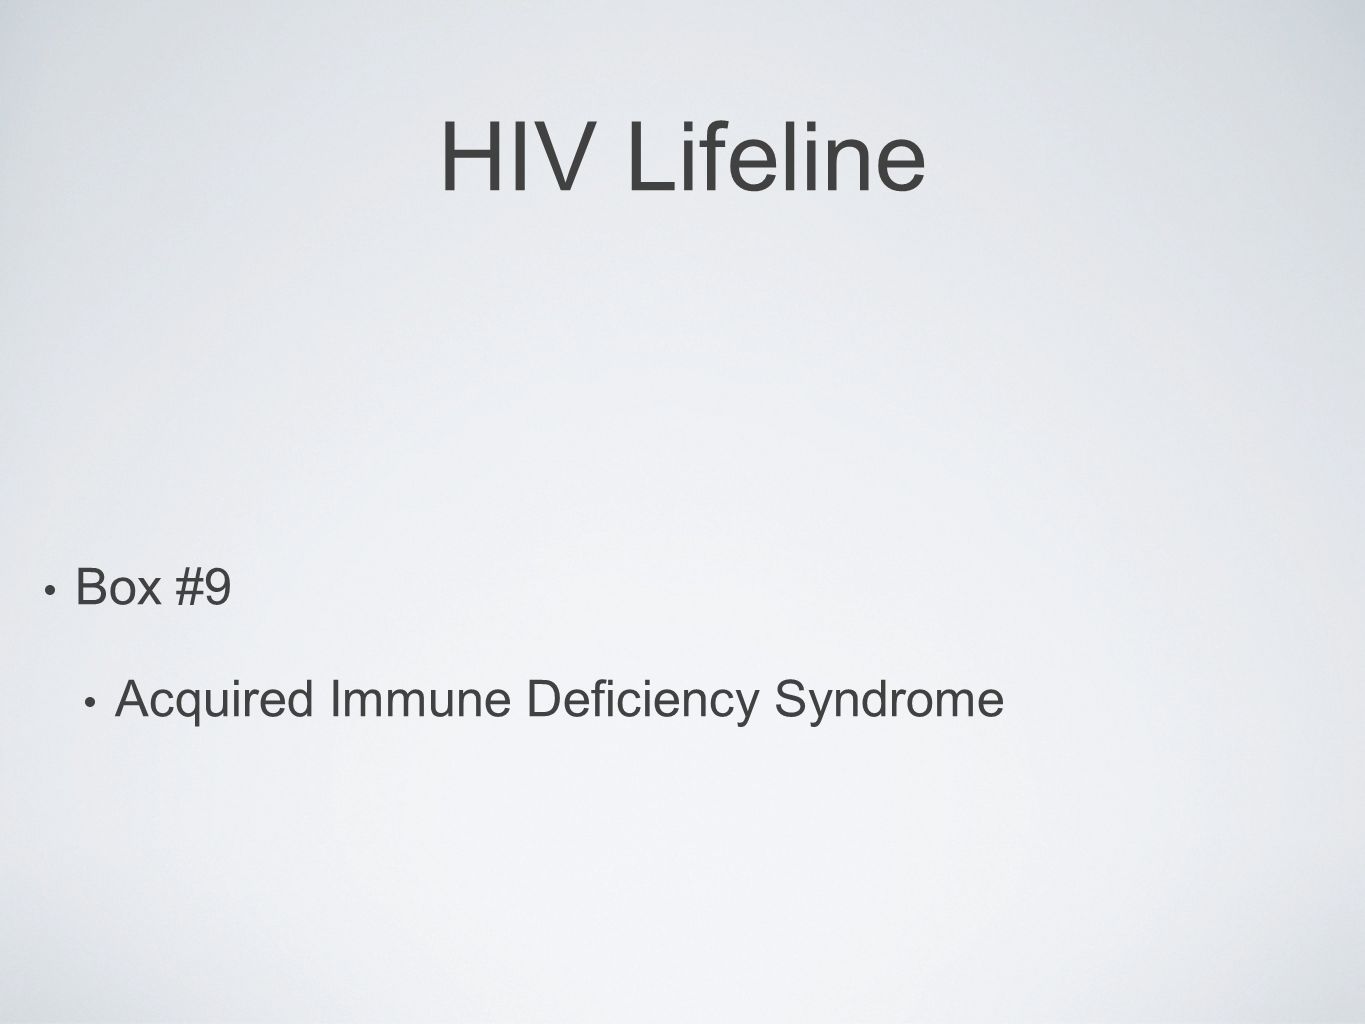 HIV Lifeline Box #9 Acquired Immune Deficiency Syndrome